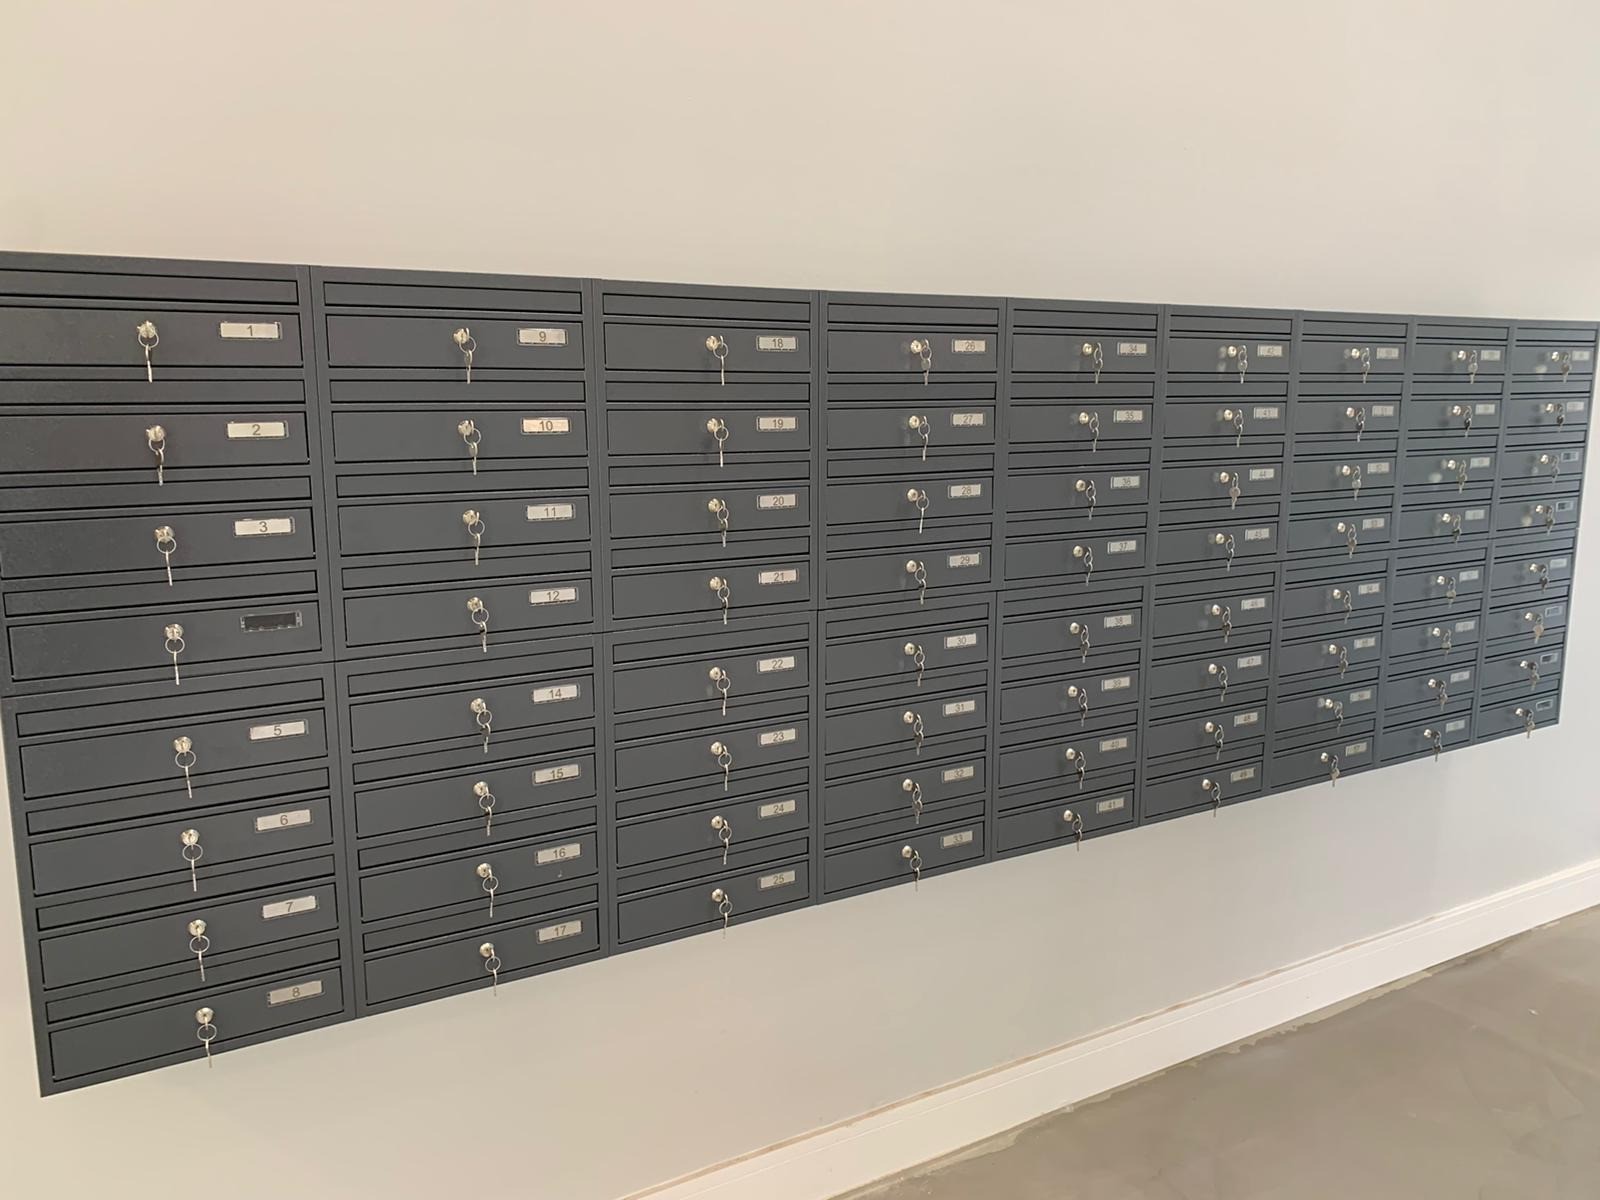 communal post boxes on the wall in dark grey colour